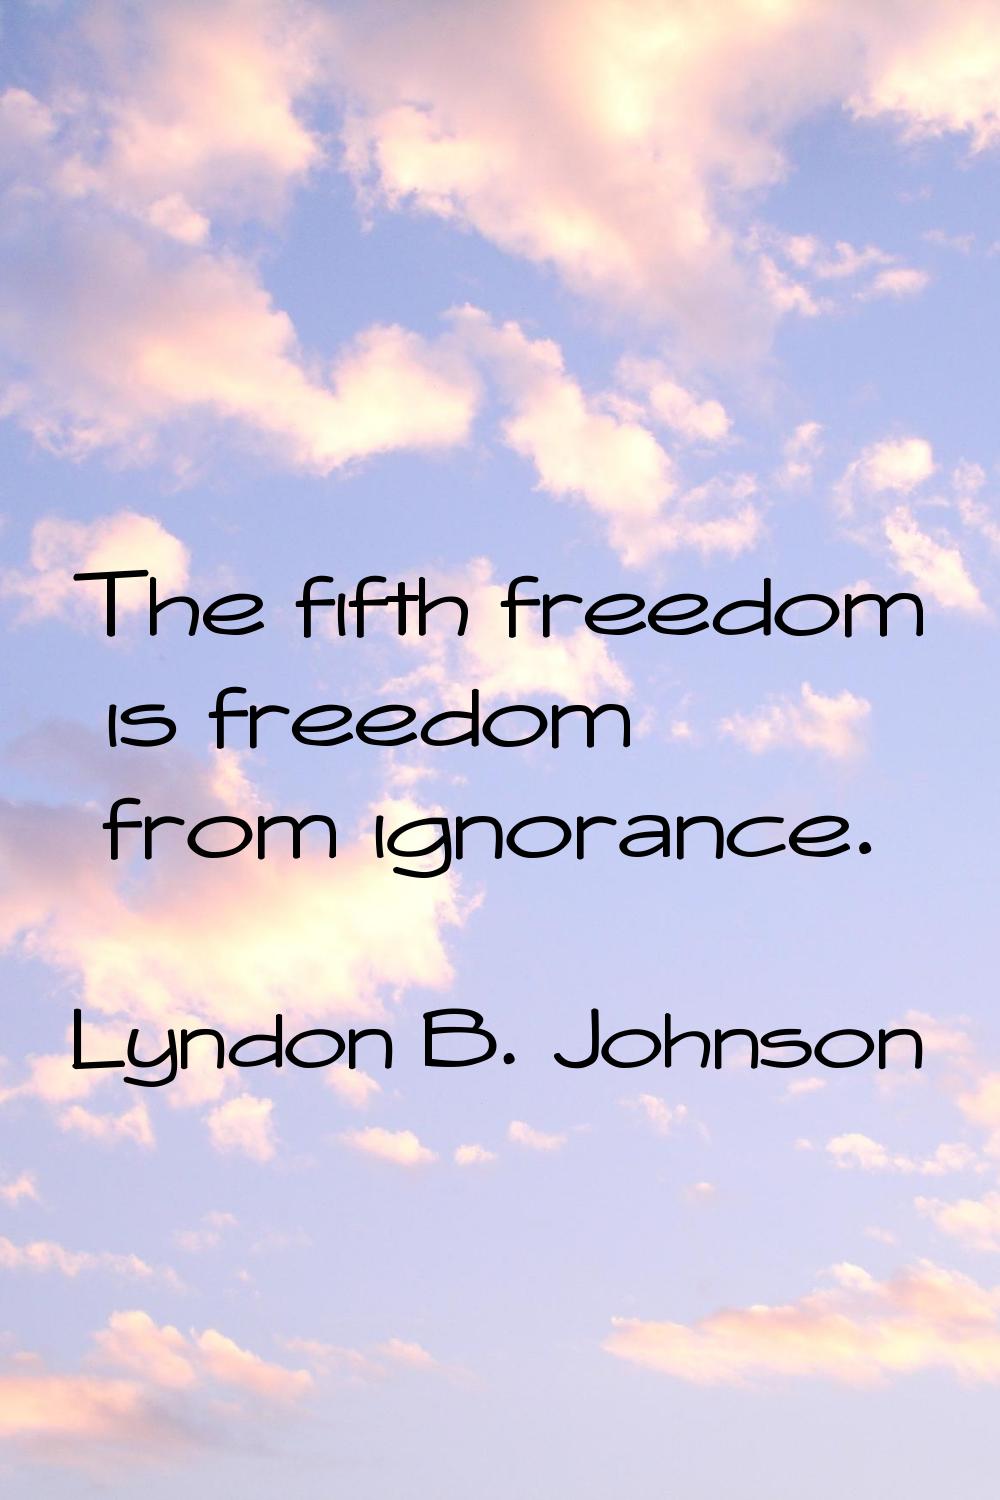 The fifth freedom is freedom from ignorance.